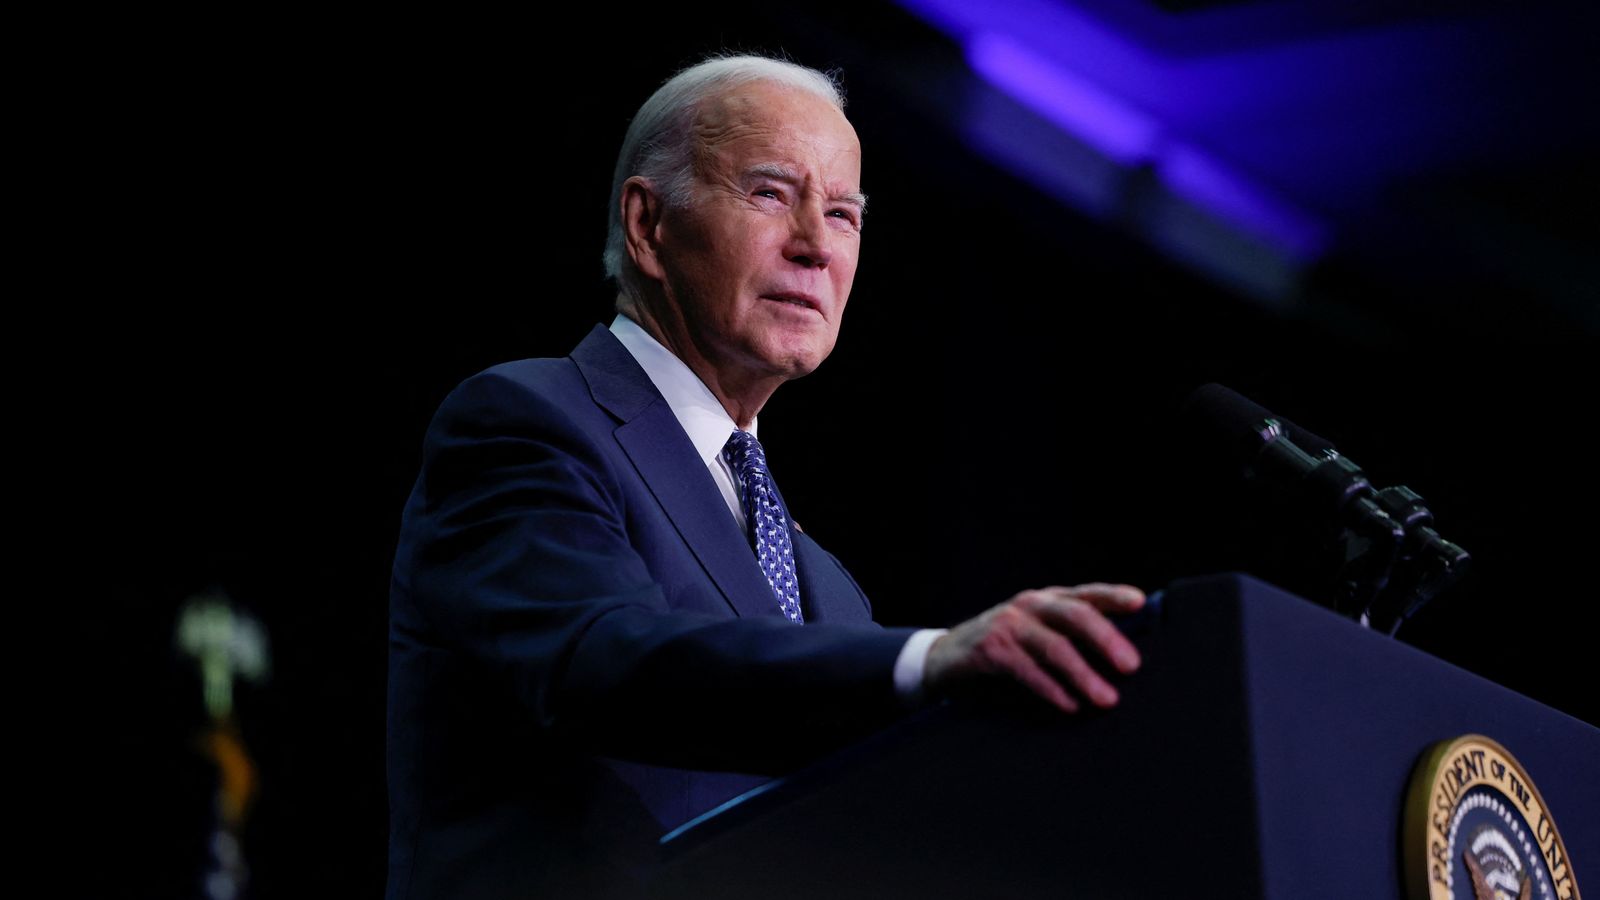 Joe Biden will not face criminal charges over classified documents handling